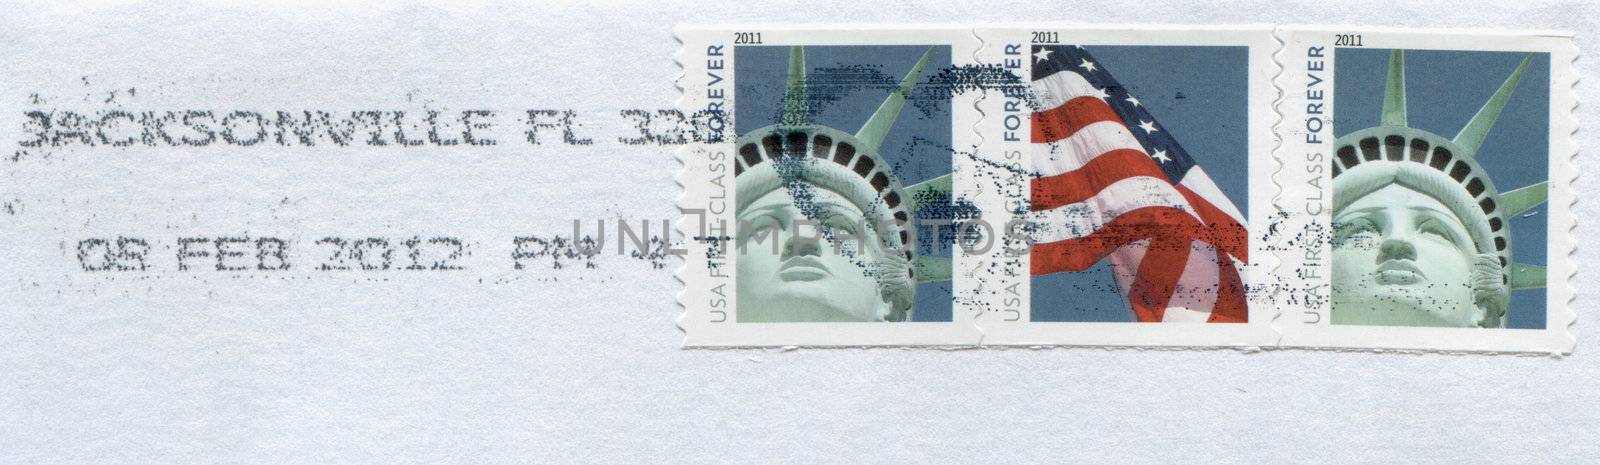 USA - CIRCA 2011: Stamps printed by USA post showing American patriotic symbols Statue of Liberty and Flag circa 2011 in USA